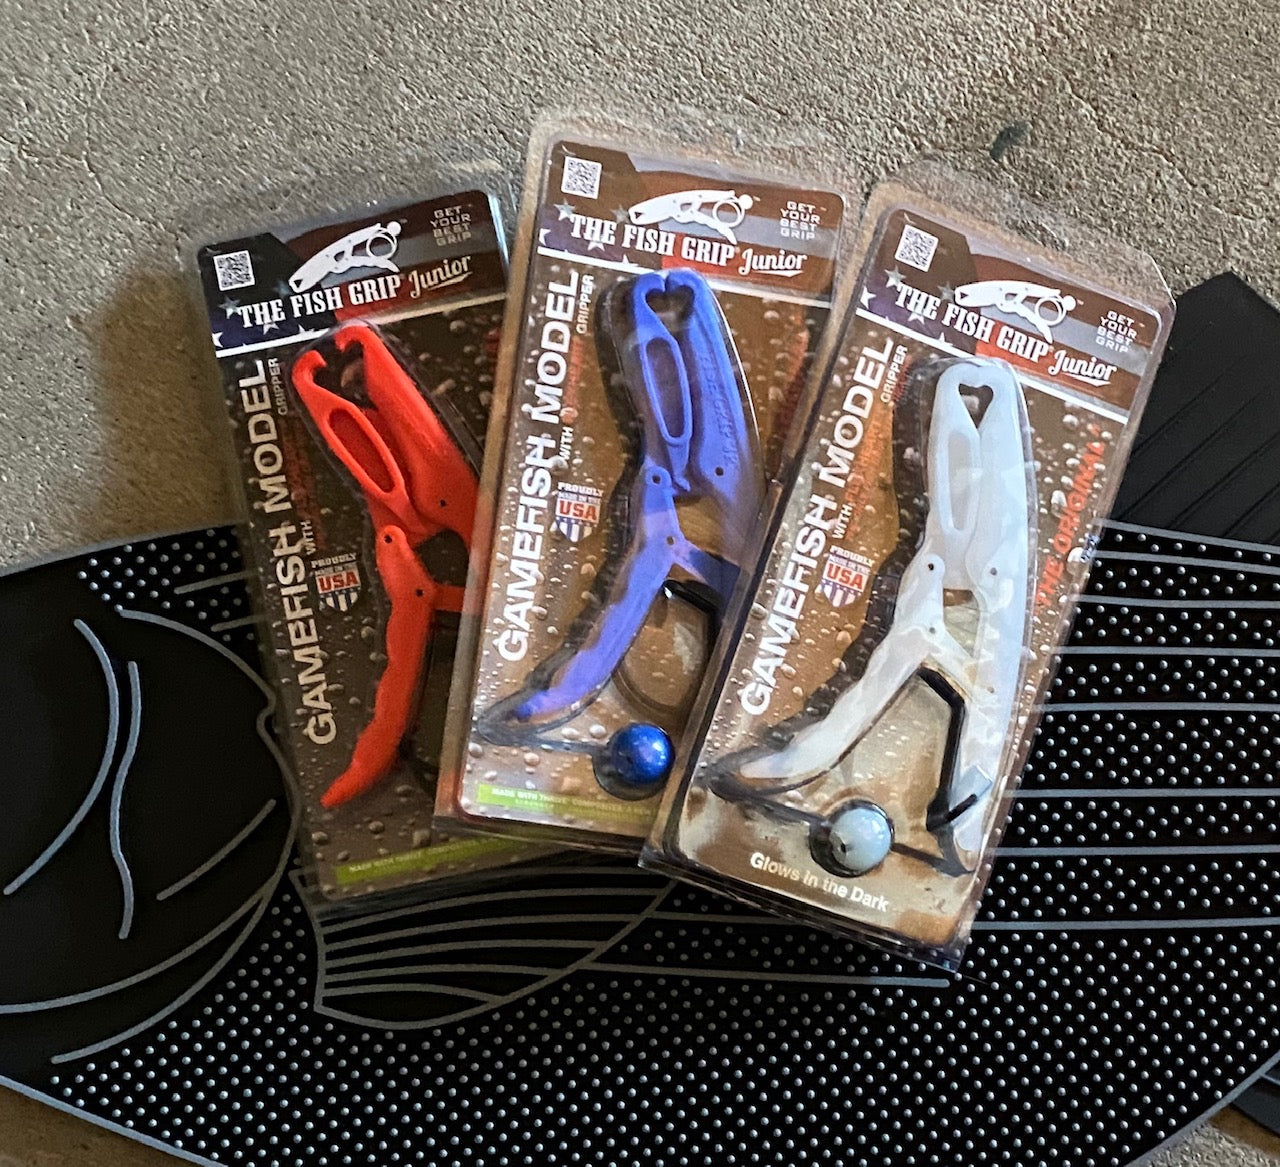 The Fish Grip – Surfland Bait and Tackle